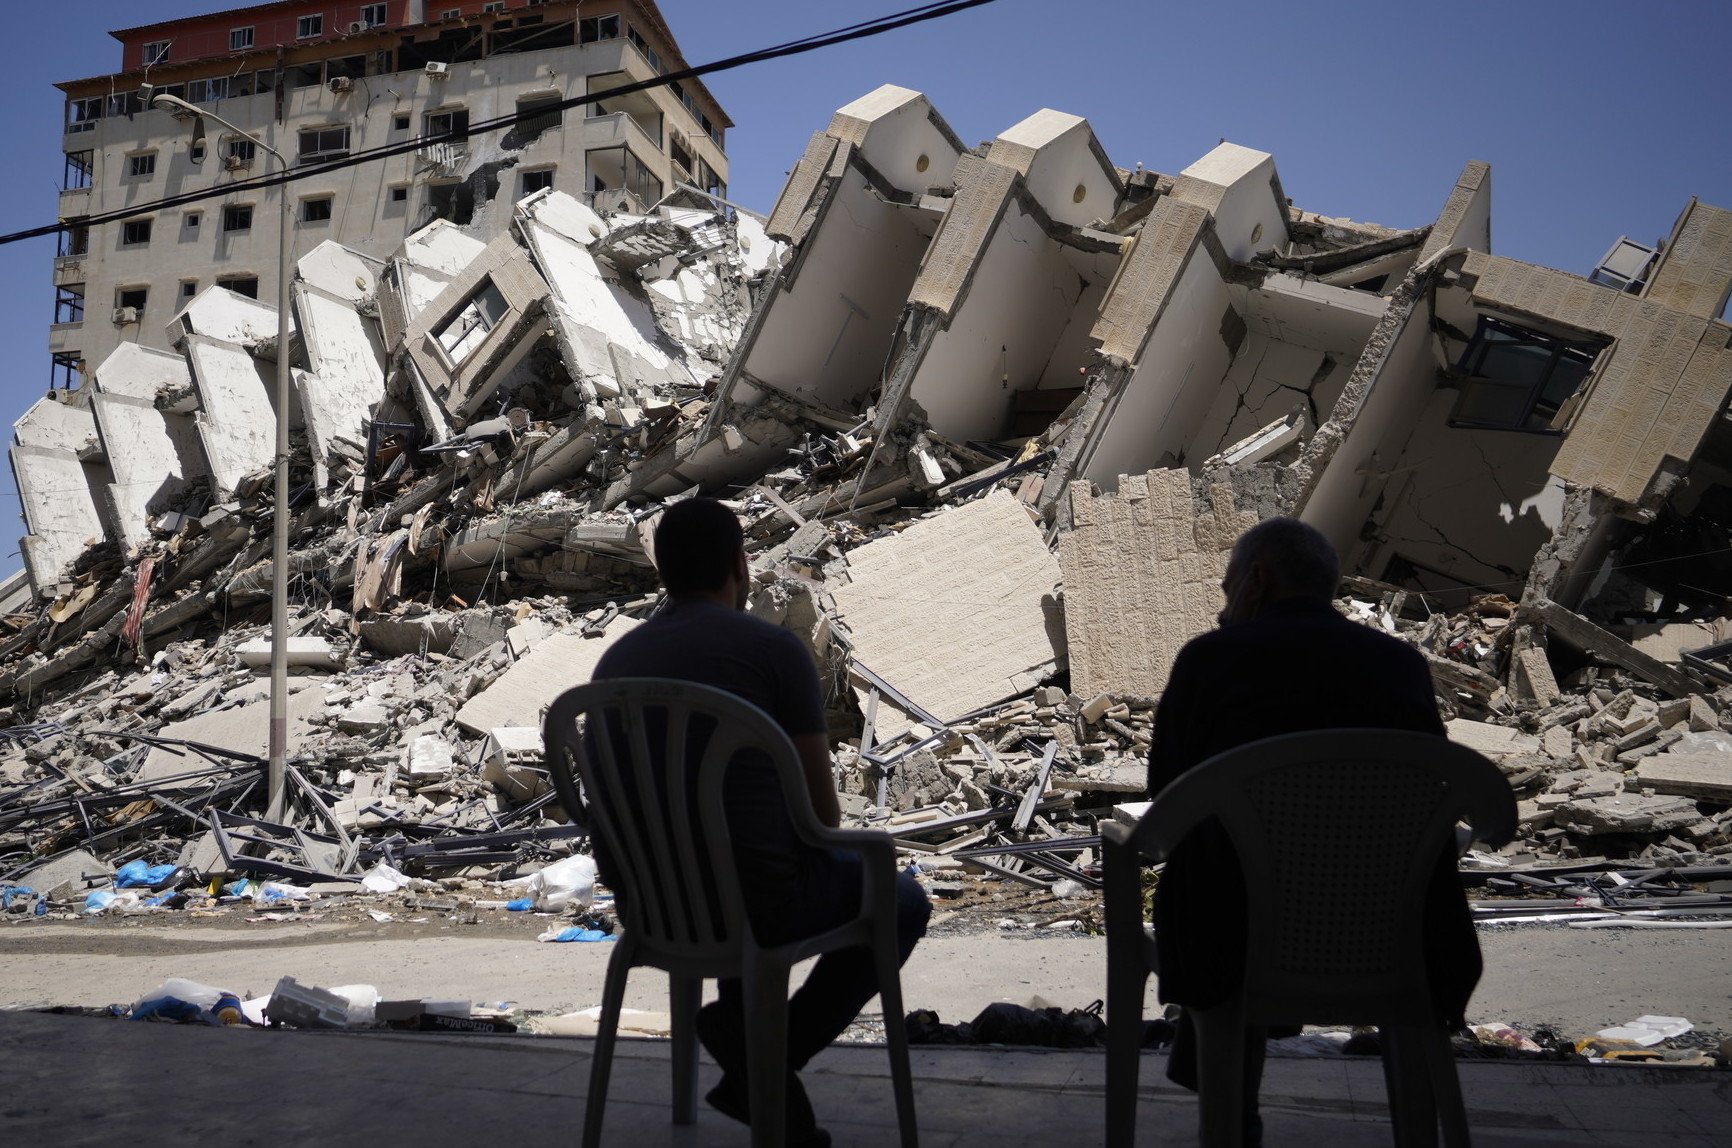 The Hanada building in Gaza was flattened by Israeli airstrikes on 11 May 2021. The building hosted tech start-ups, affecting businesses and Palestinians’ livelihoods in Gaza. (Photo: Fady Hanona)